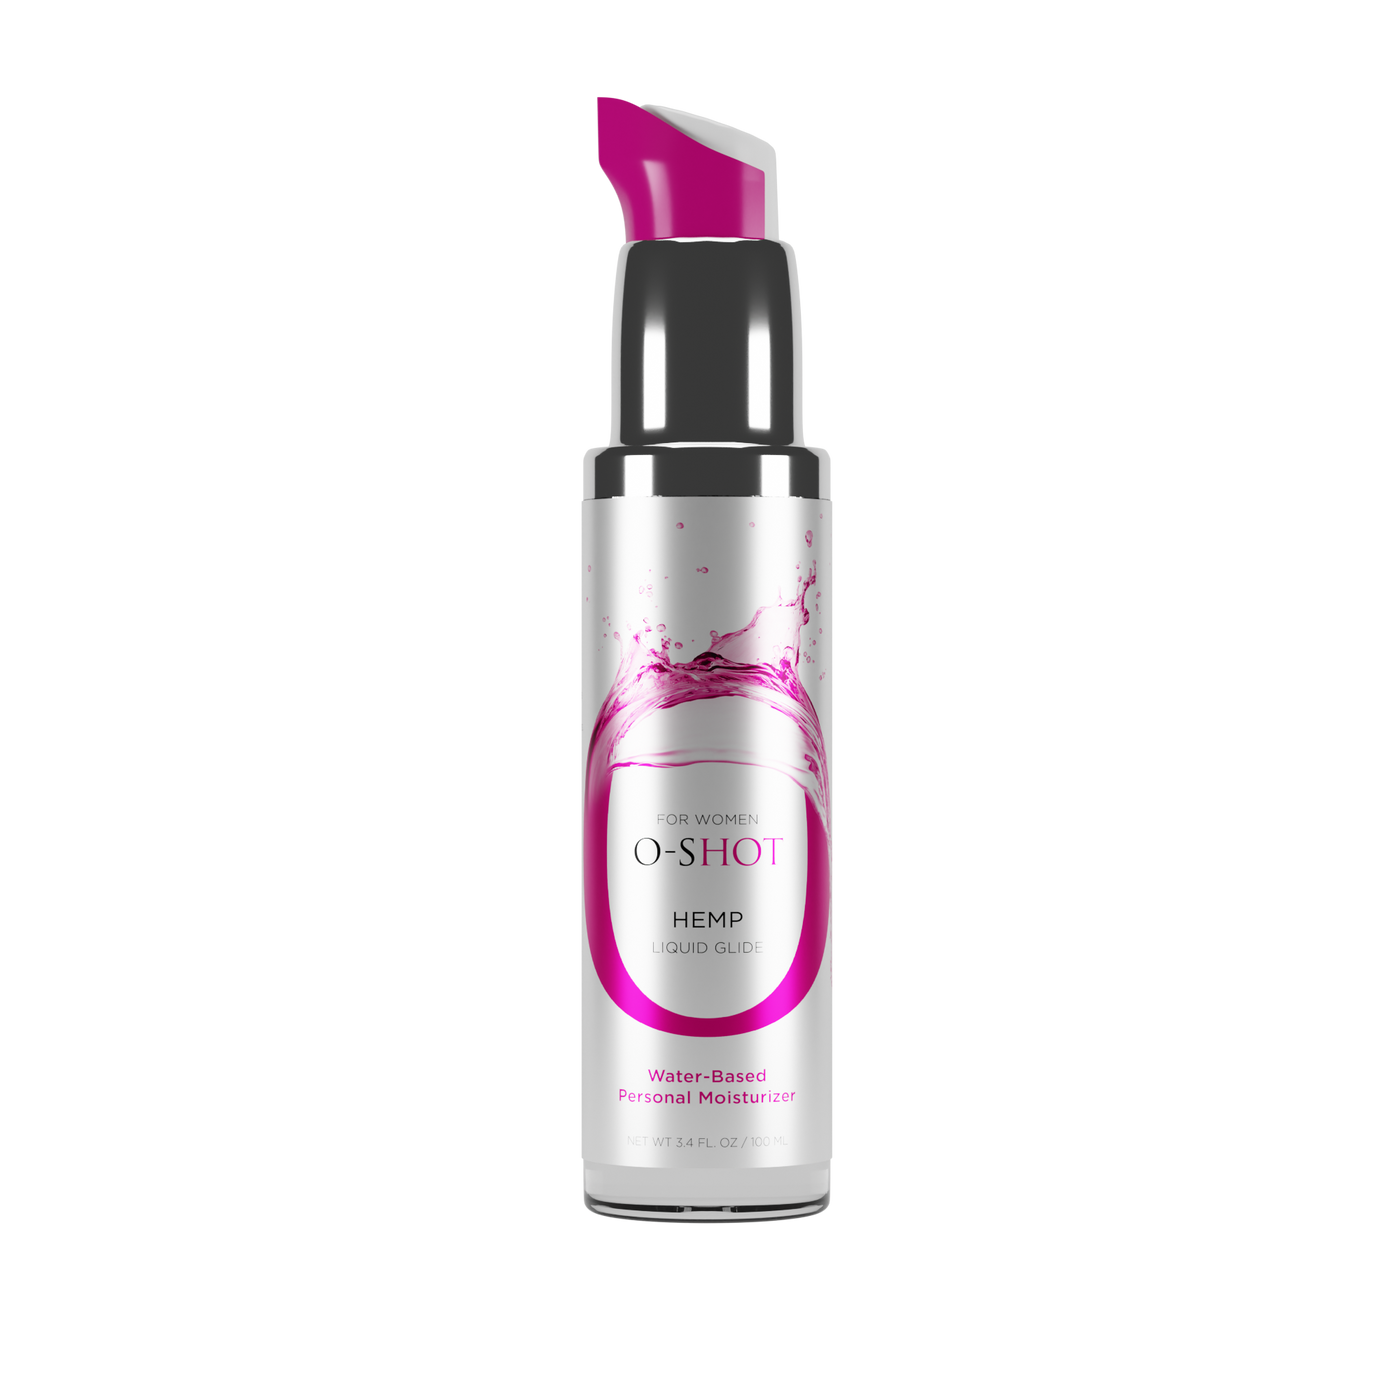 Free samples BodyGliss Lubricants